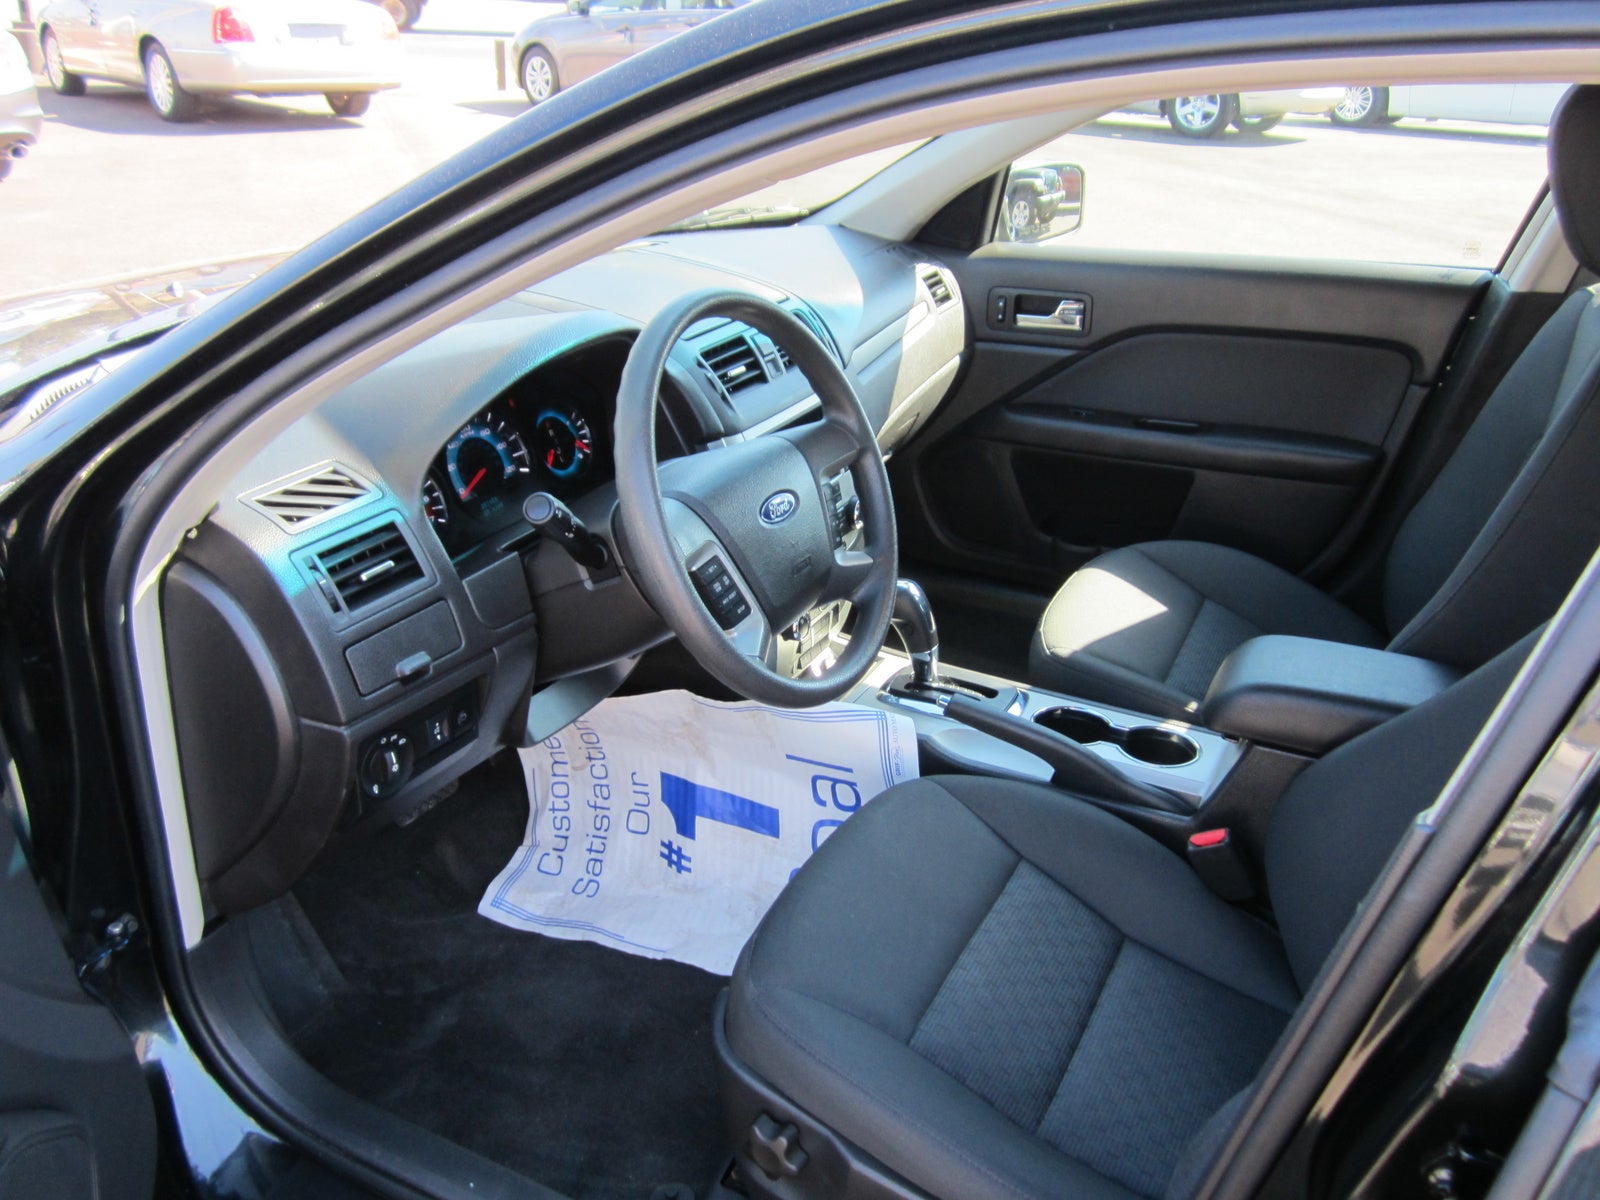 2010 Ford fusion with sync system #2